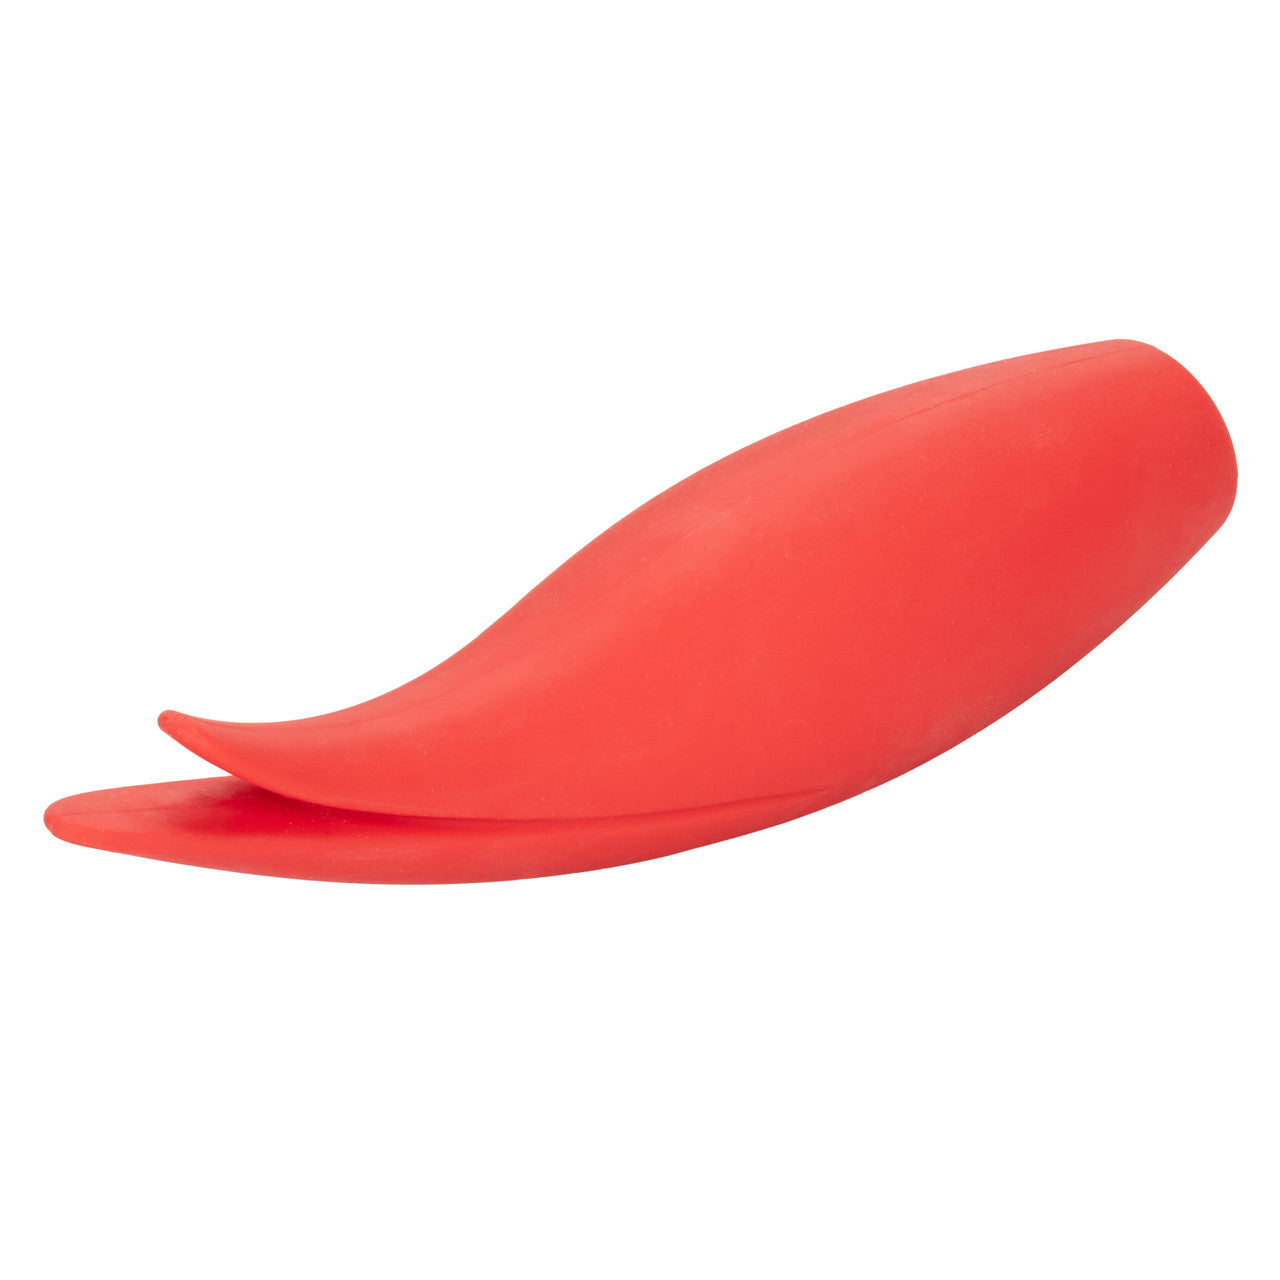 Red Hot Sizzle Silicone Rechargeable Clitoral Vibrator - Thorn & Feather Sex Toy Canada